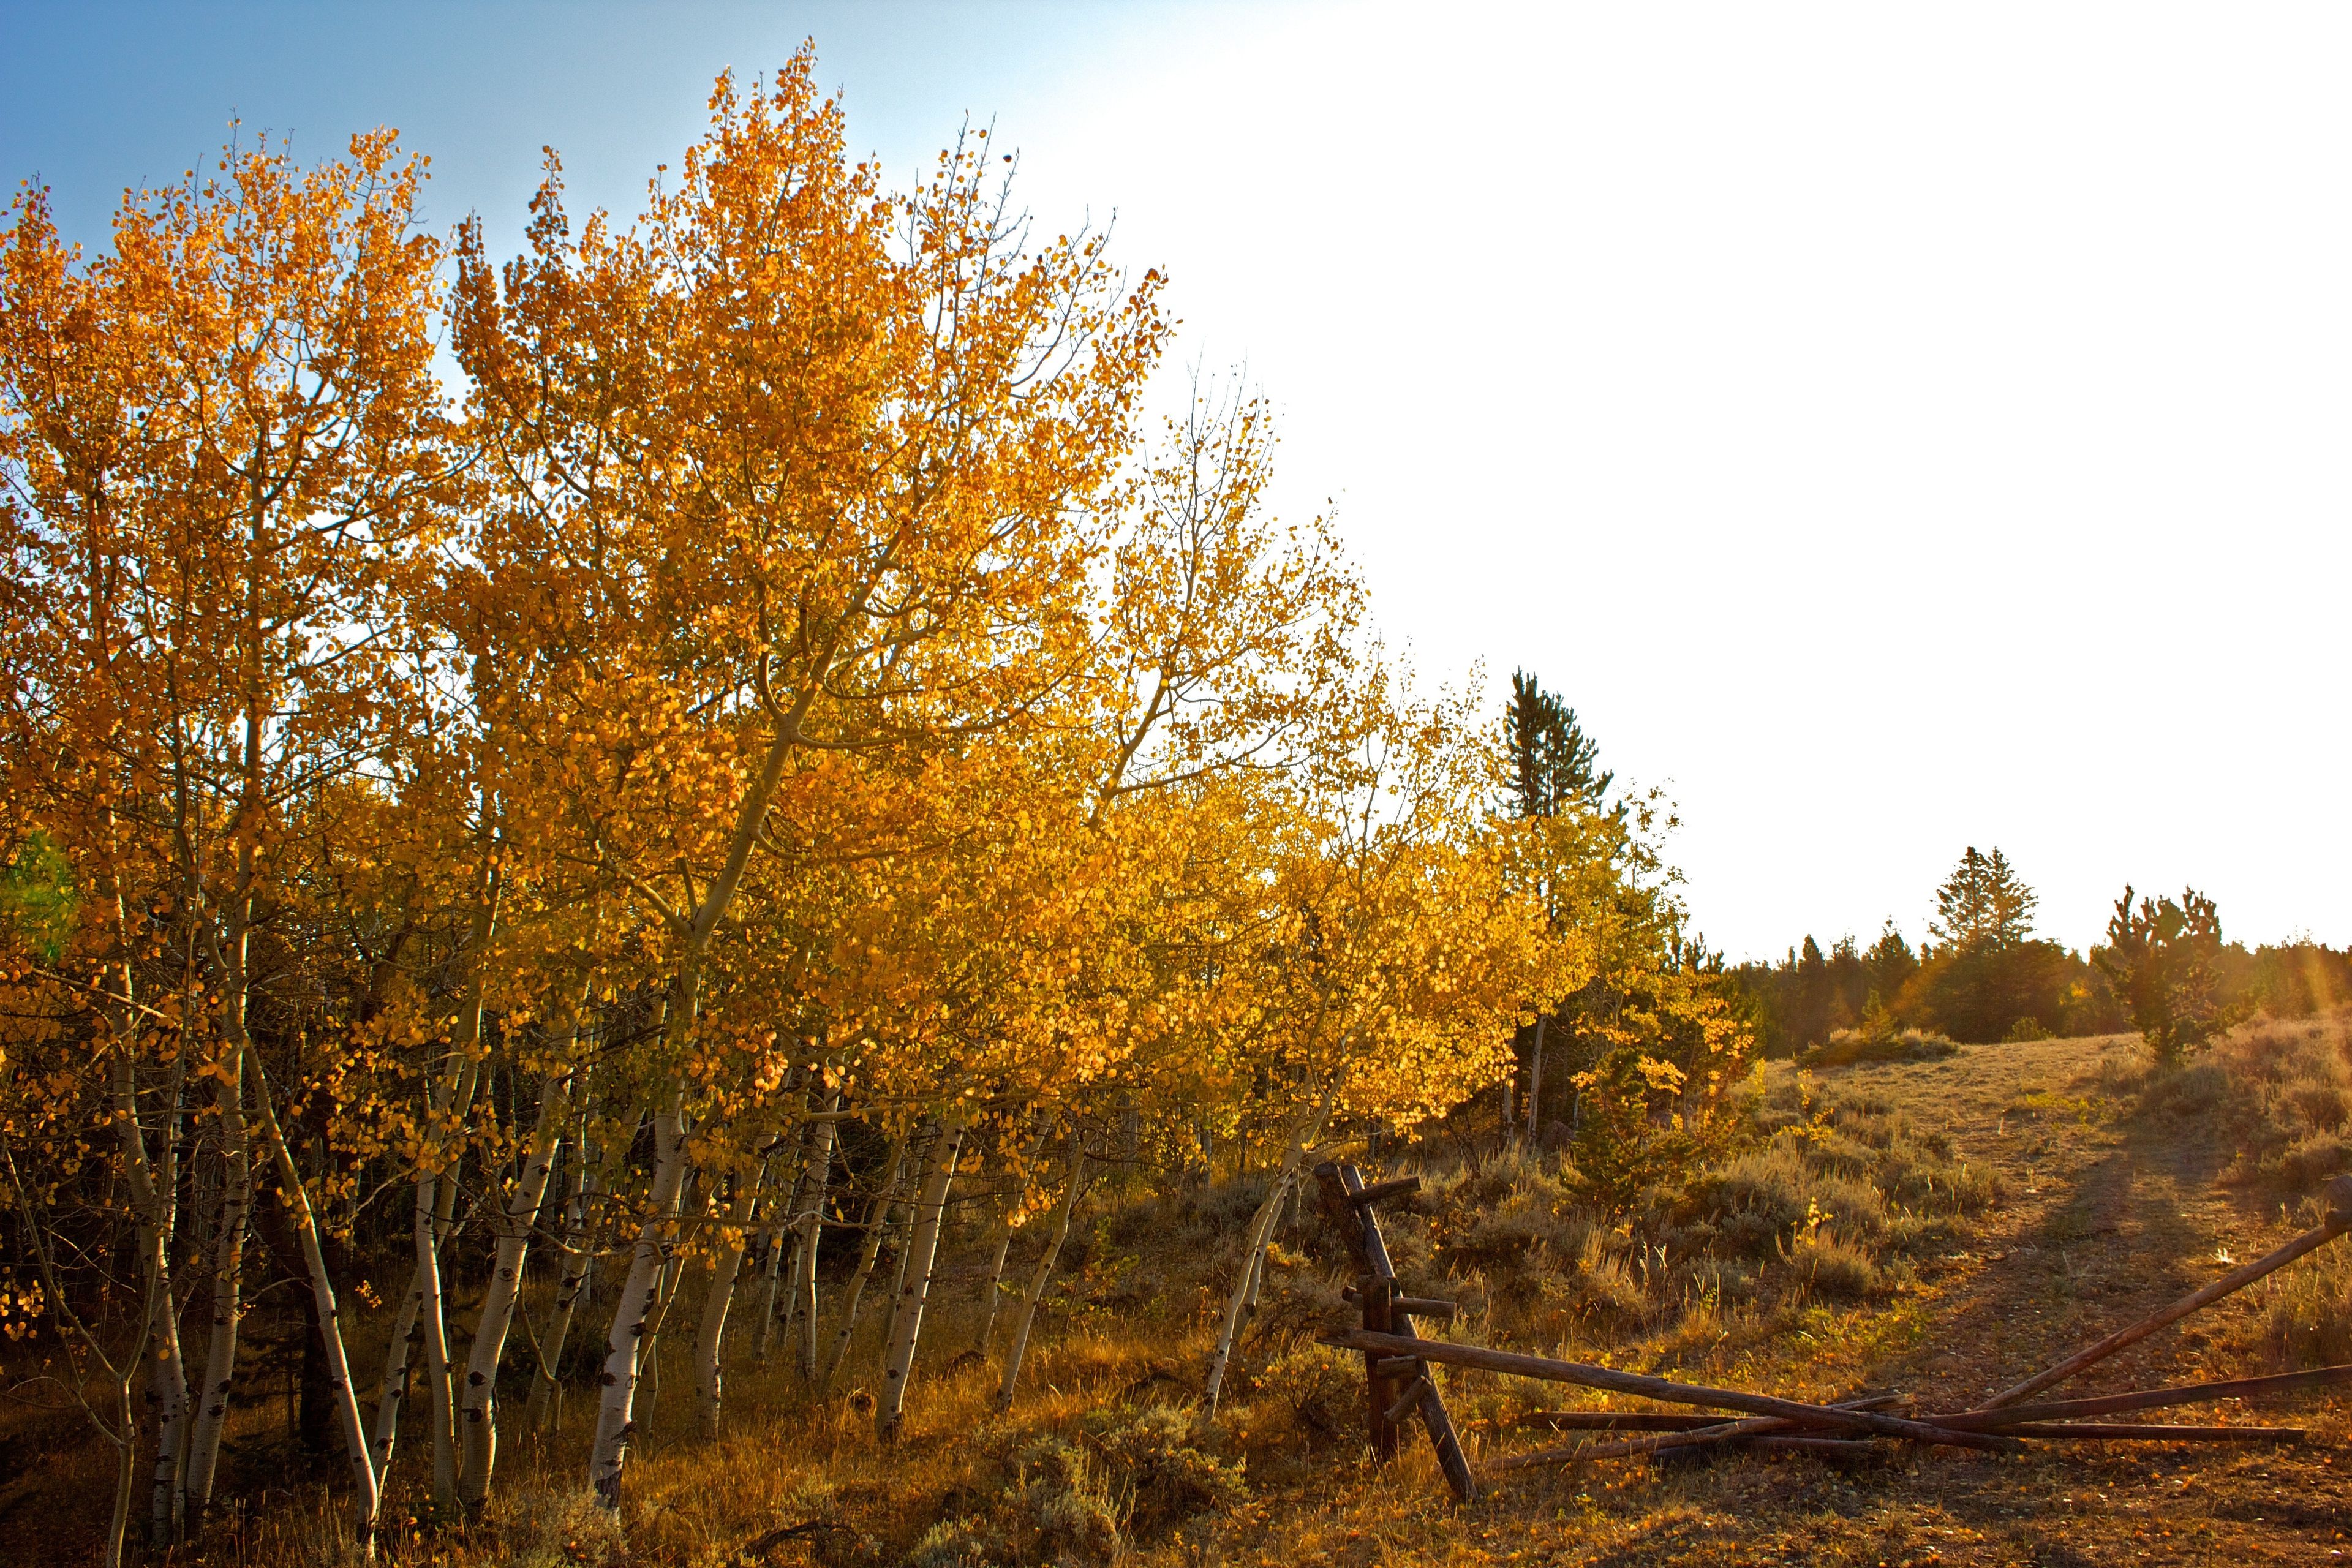 The leaves on aspen trees turn yellow in autumn.